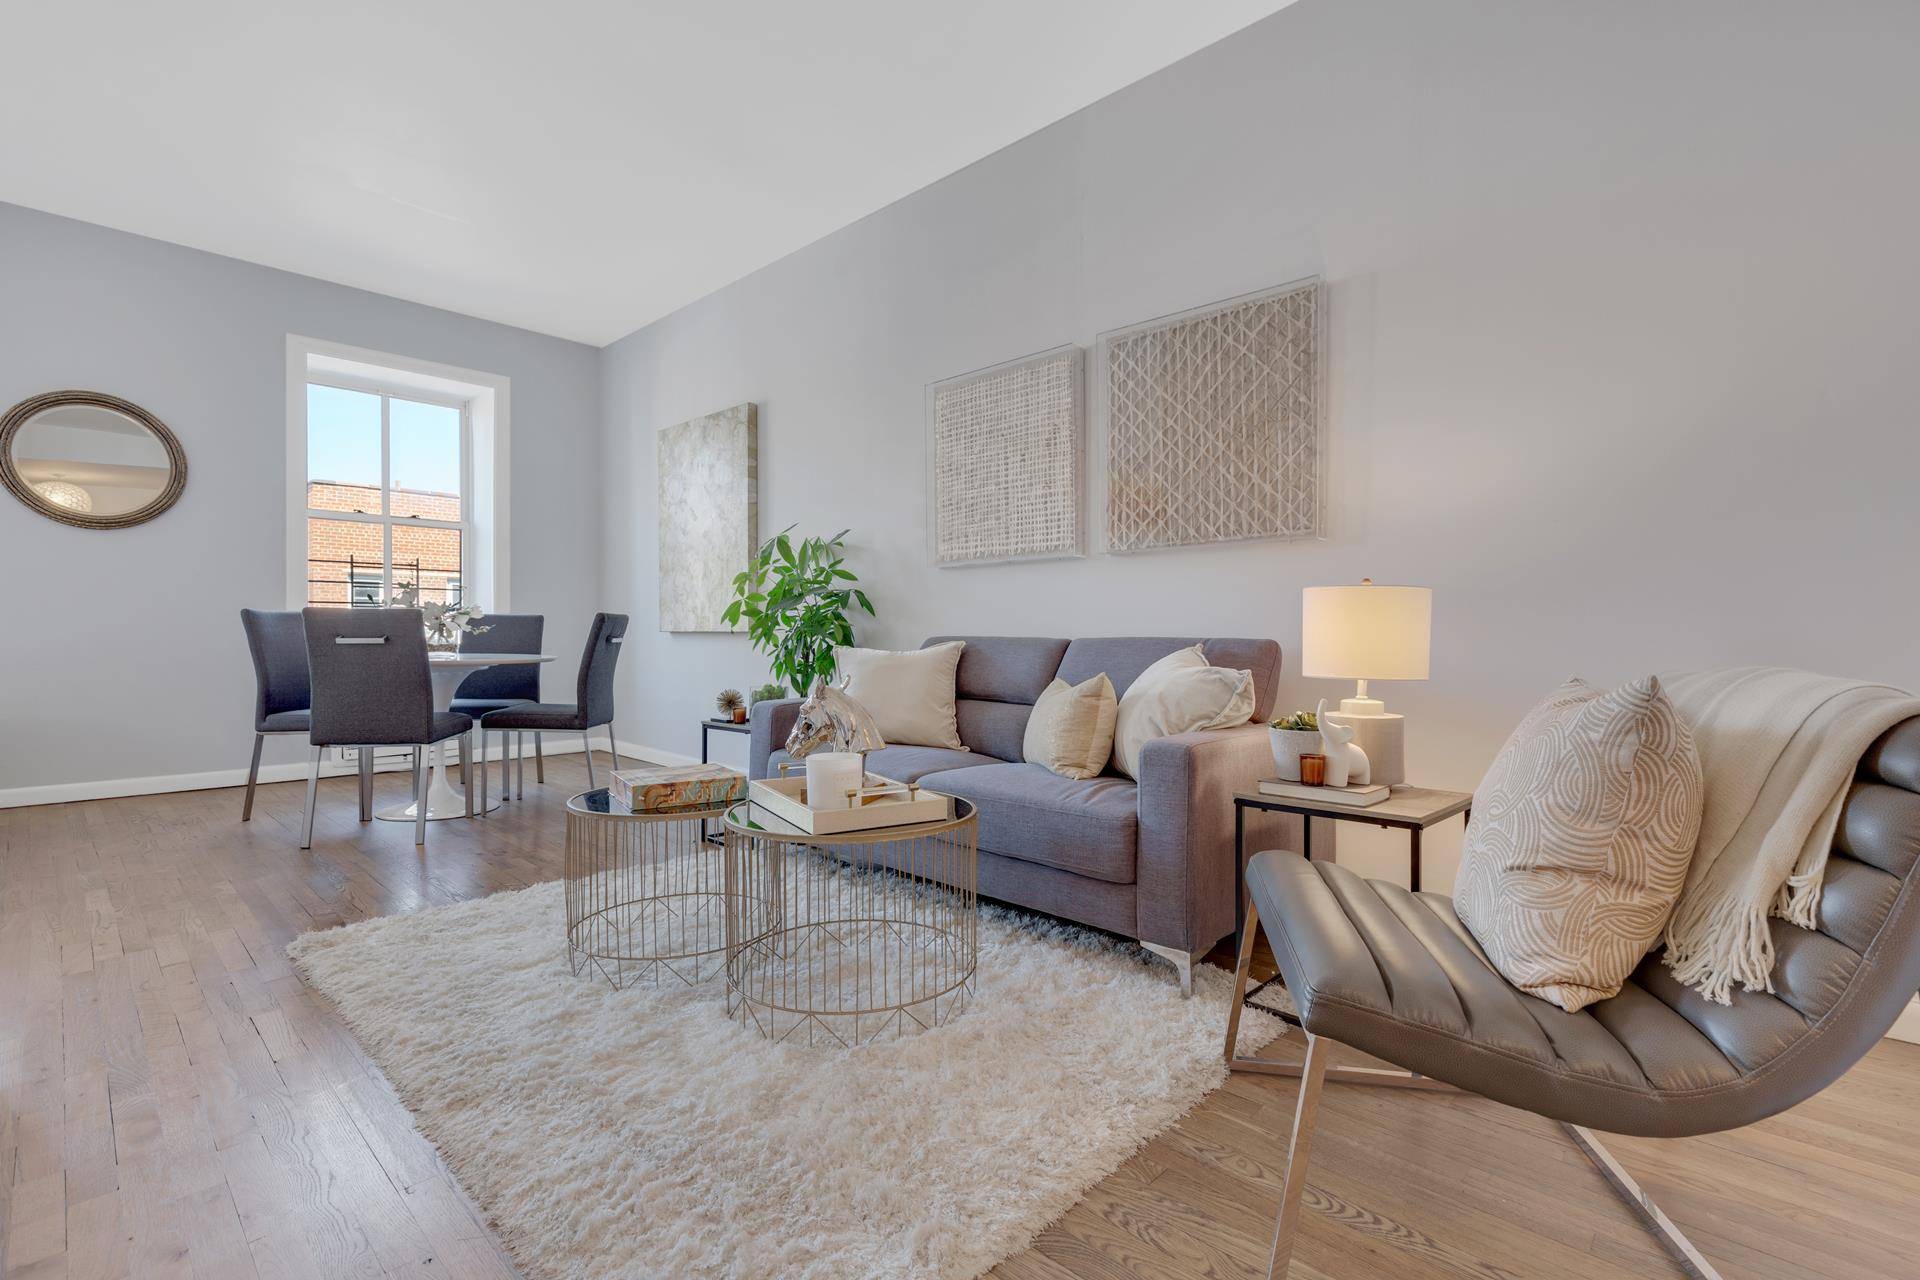 Your delightfully sunny prewar home in the West Village Charming, contemporary and precisely where you want to be.